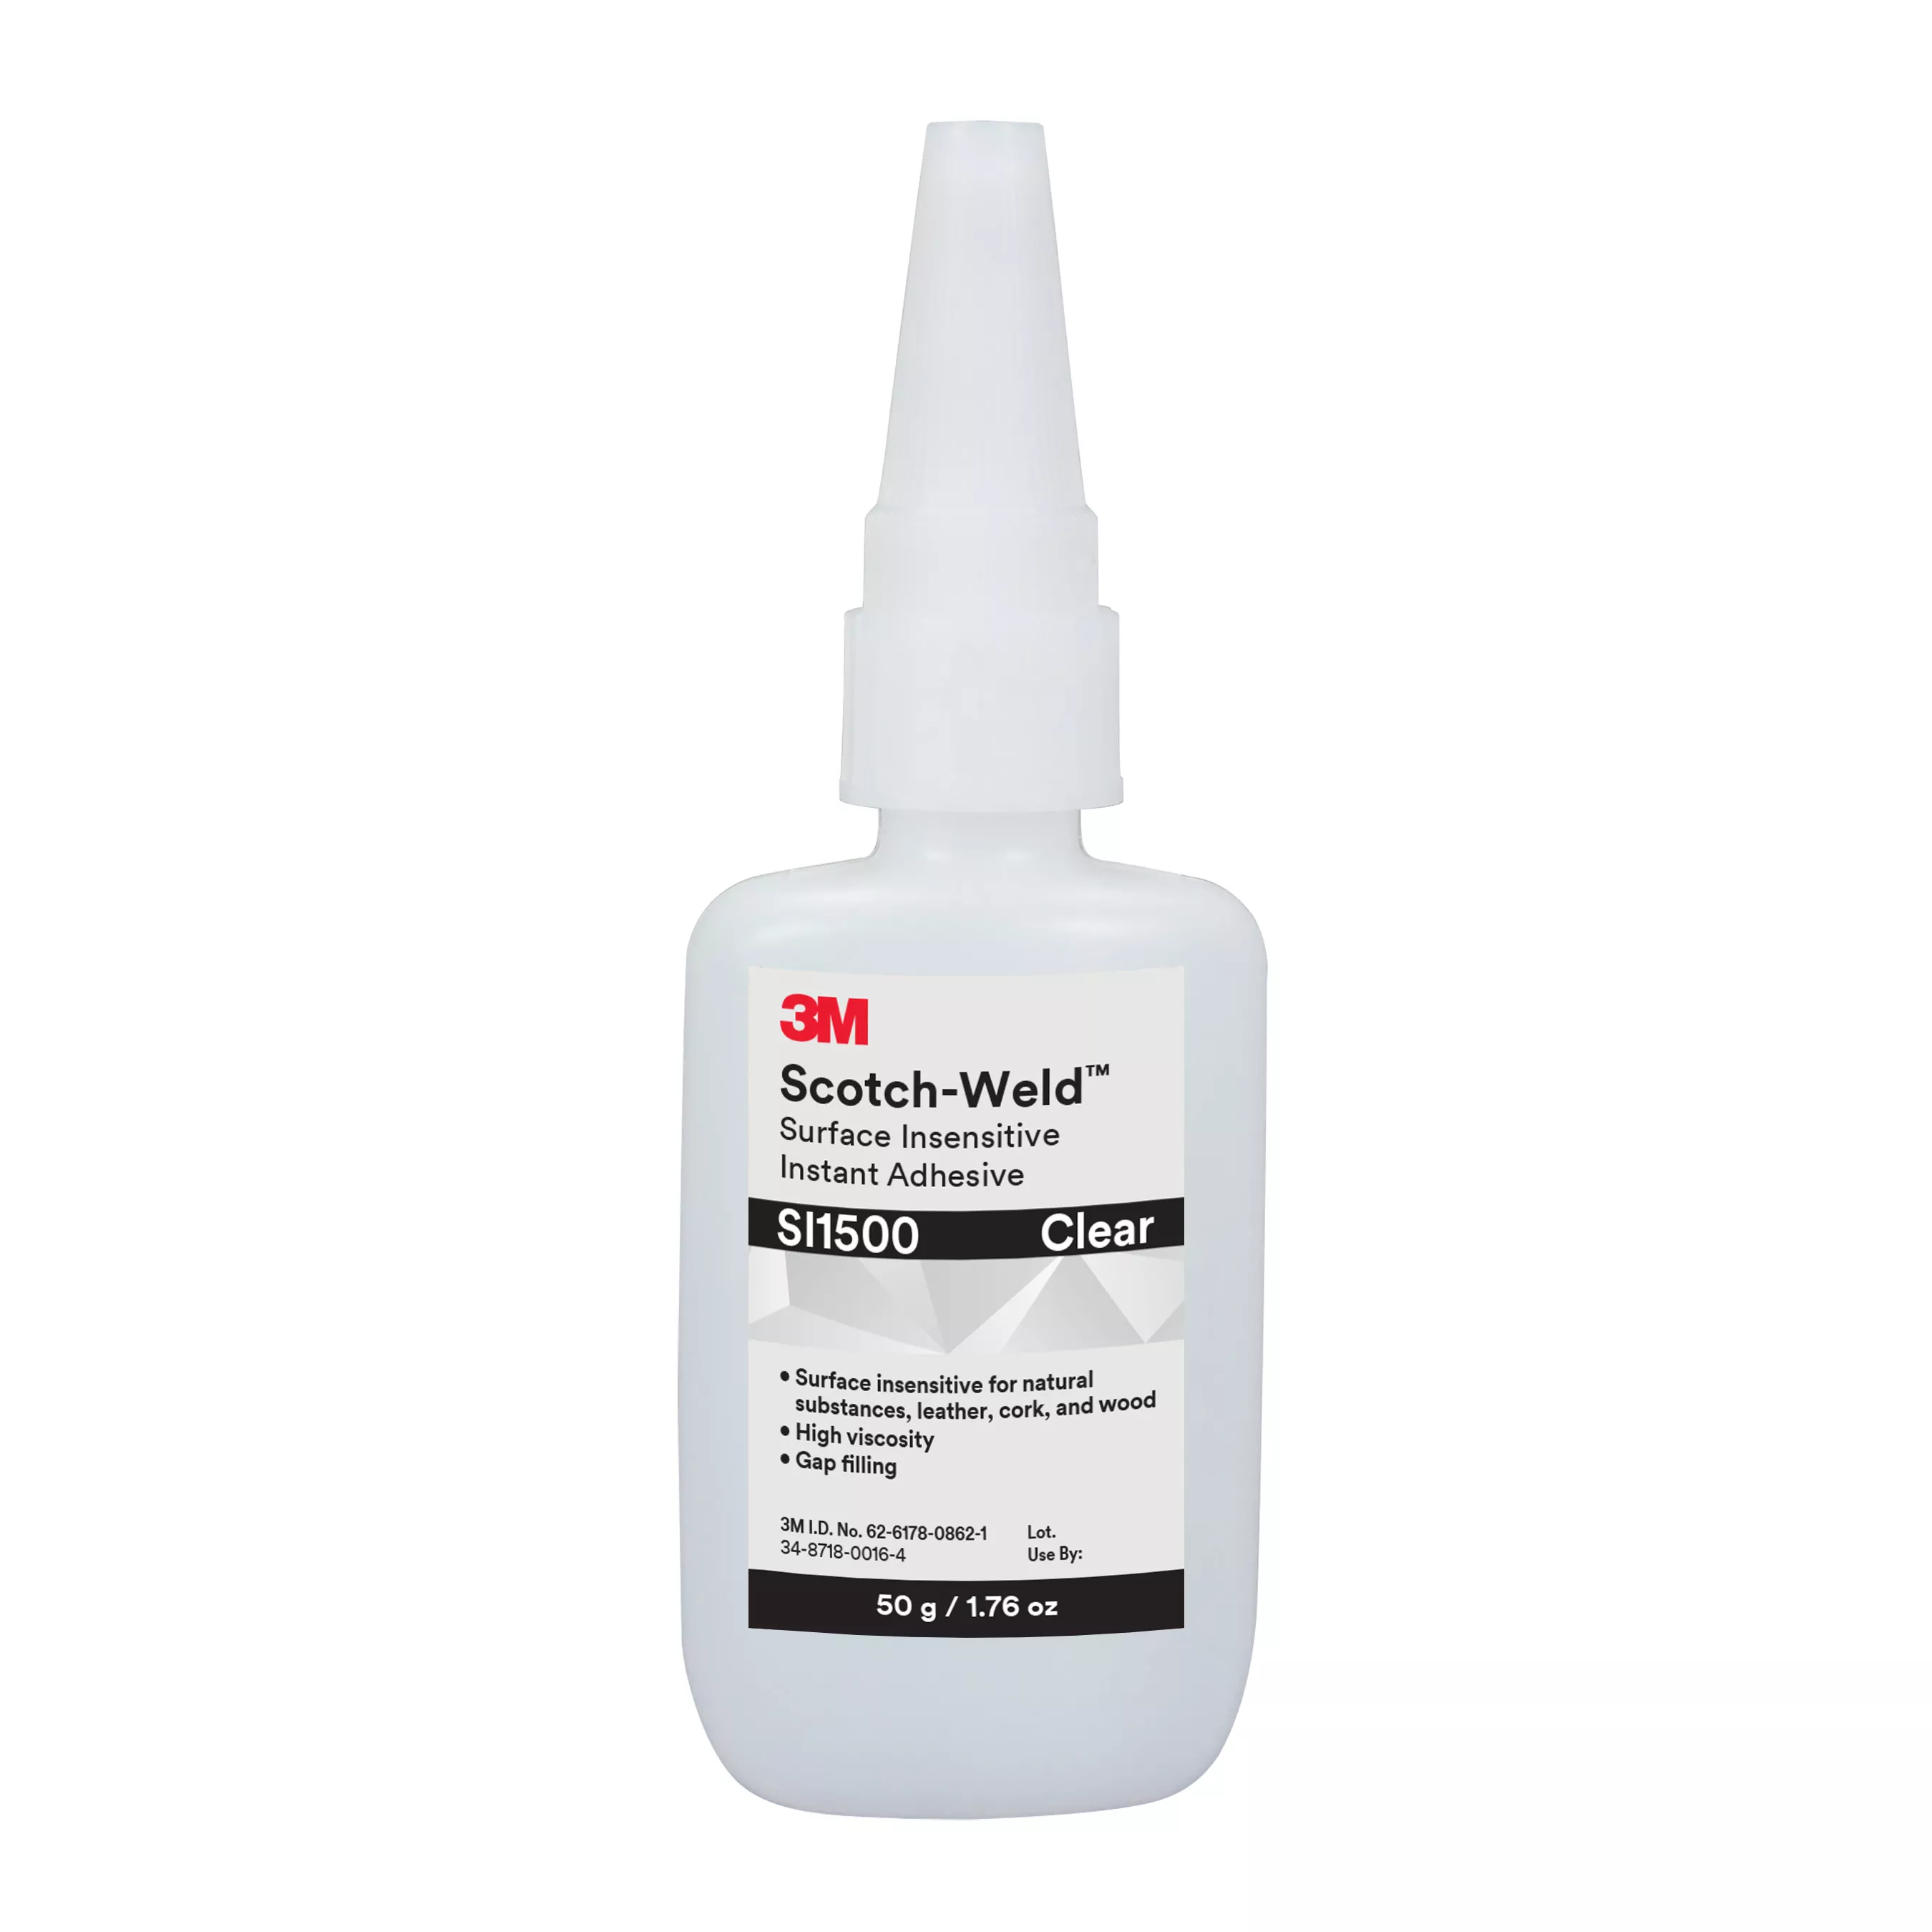 3M™ Scotch-Weld™ Surface Insensitive Instant Adhesive SI1500, Clear, 50
Gram, 10 Bottles/Case